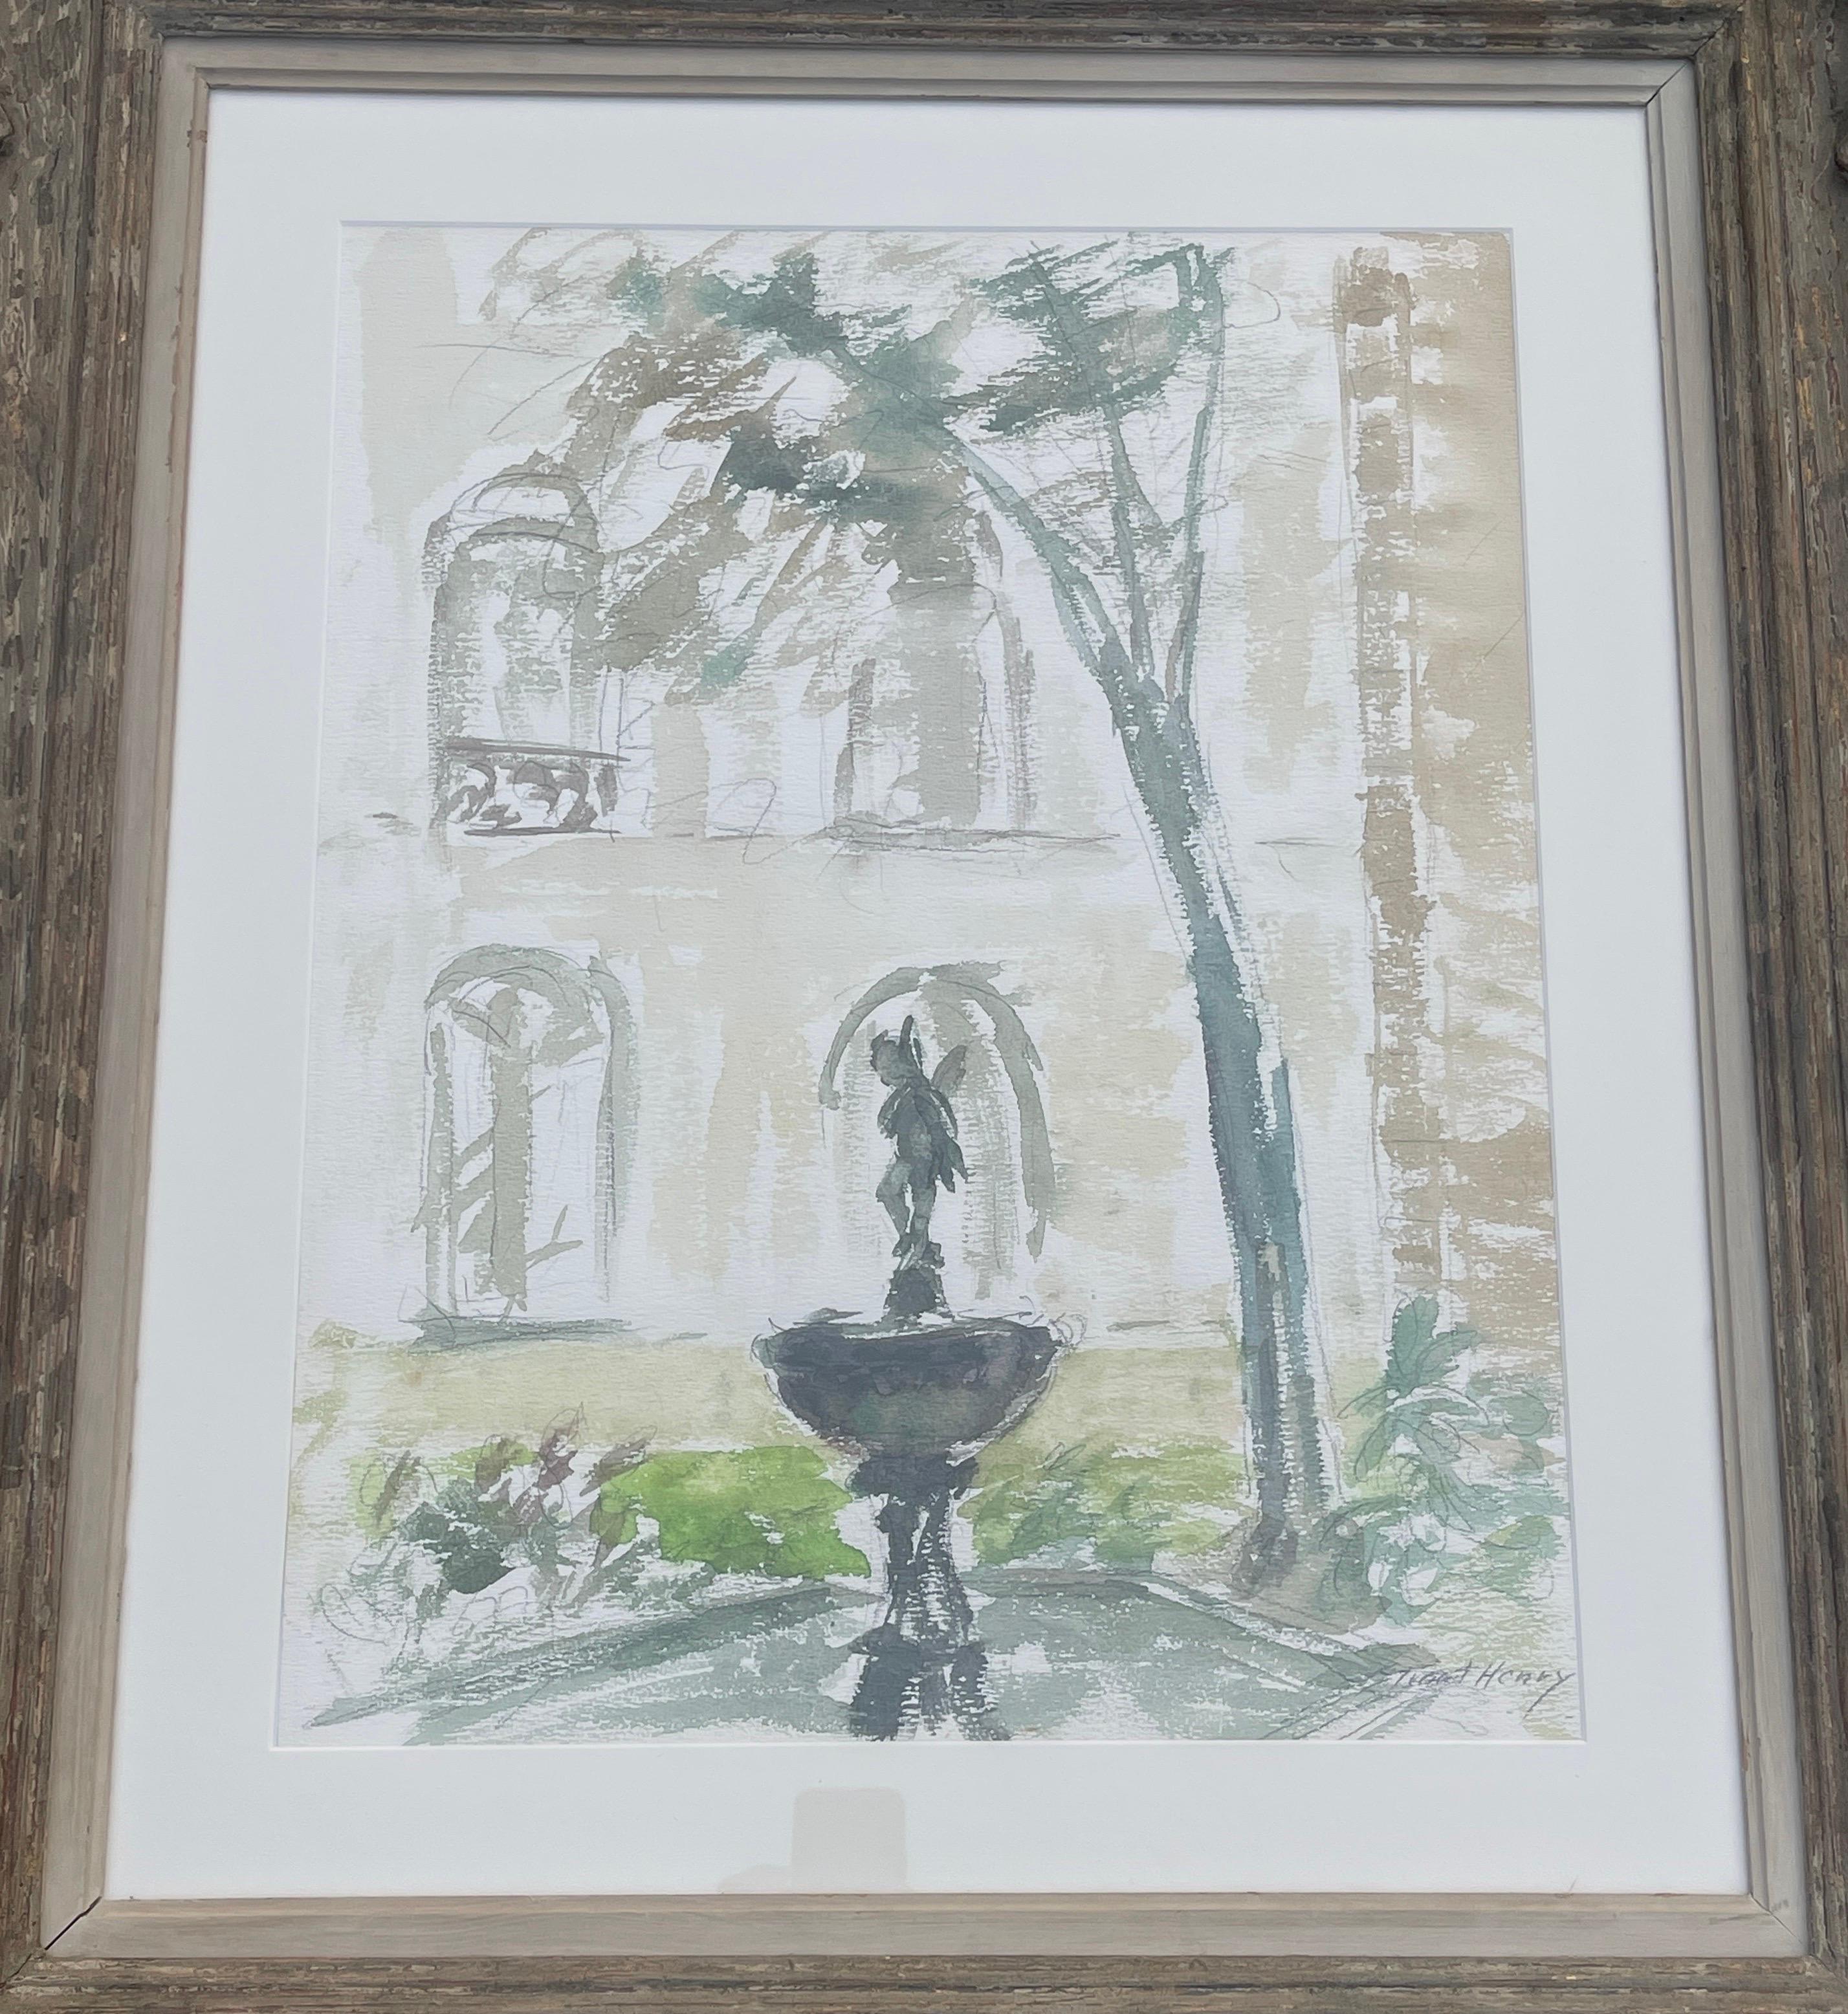 Large French Painting of a Fountain in Court Yard by Stuart Henry.
This is a Mid-Century Modern watercoloring in a beautiful wooden Rococo style frame.